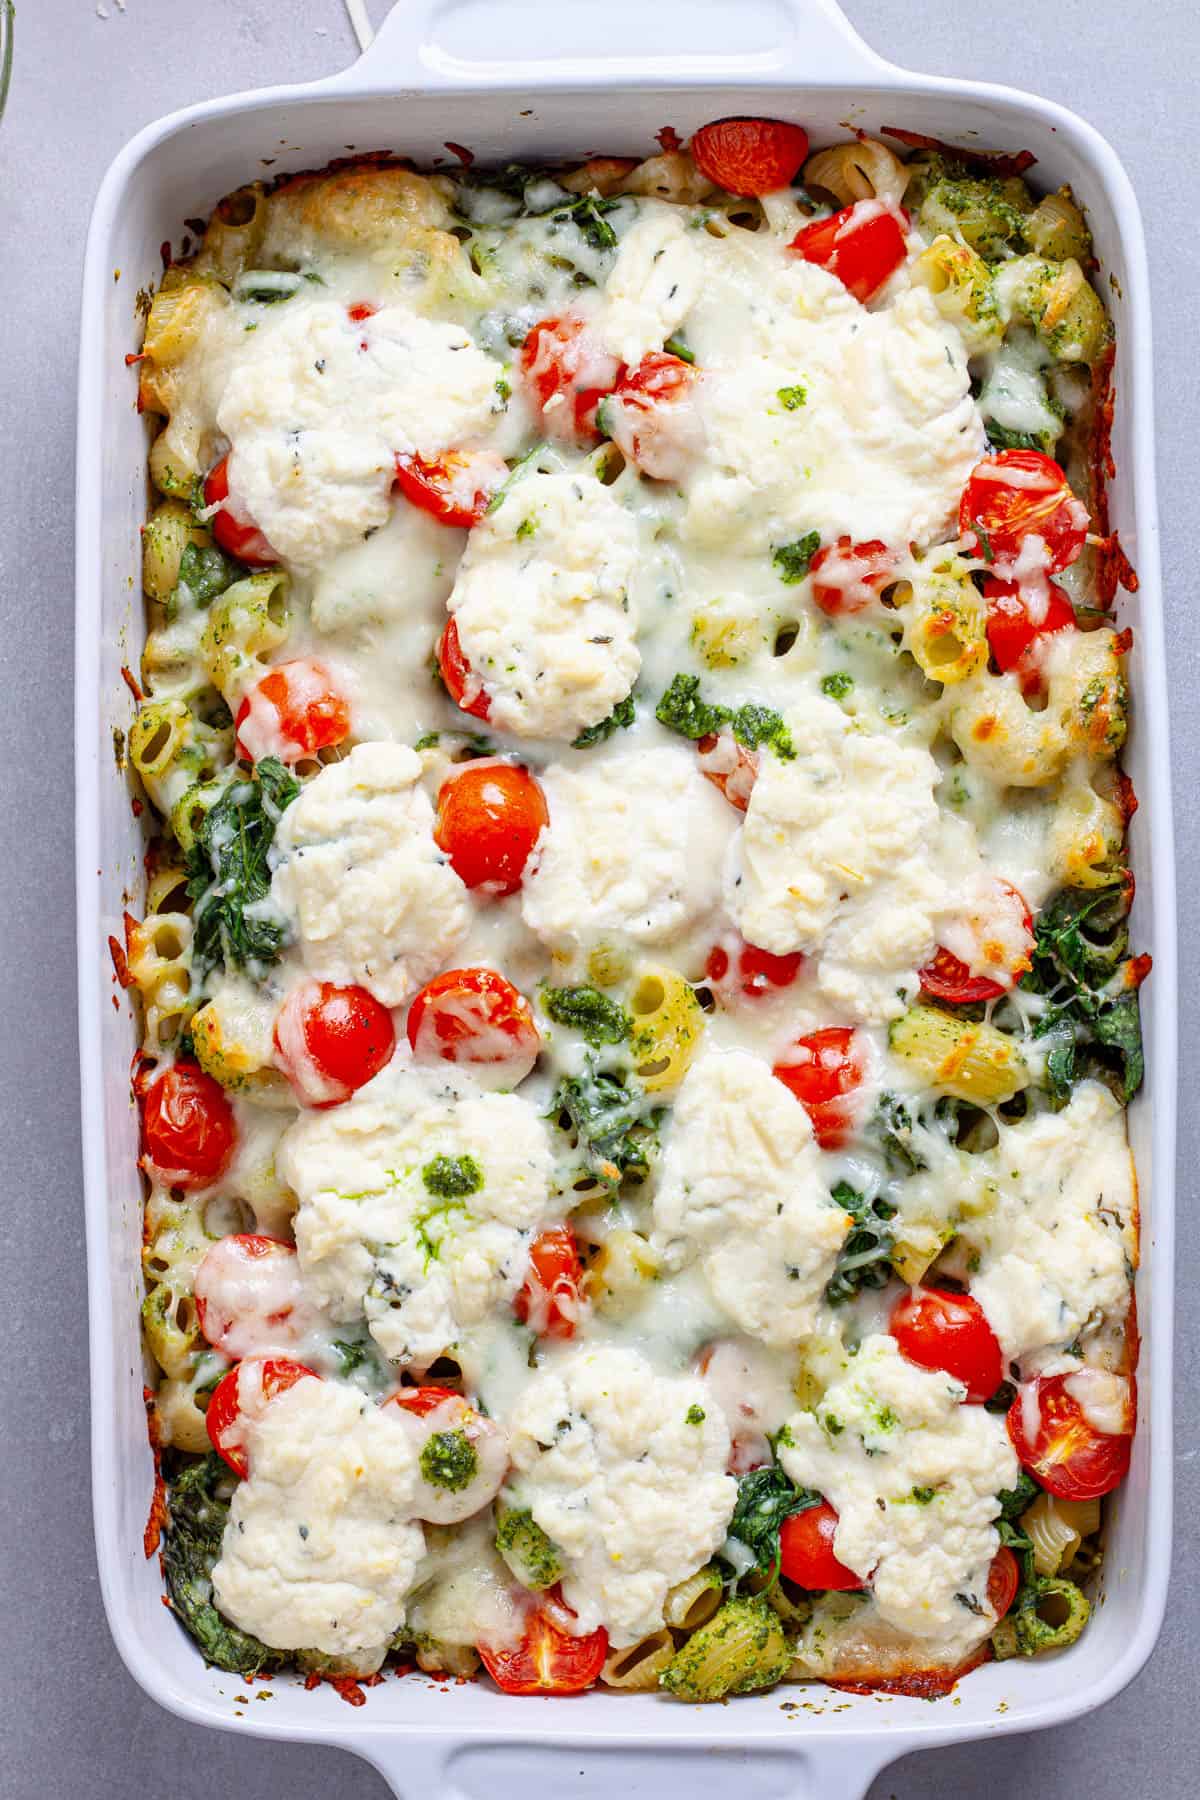 A casserole dish of pesto and ricotta baked pasta hot out of the oven topped with tomatoes and spinach.